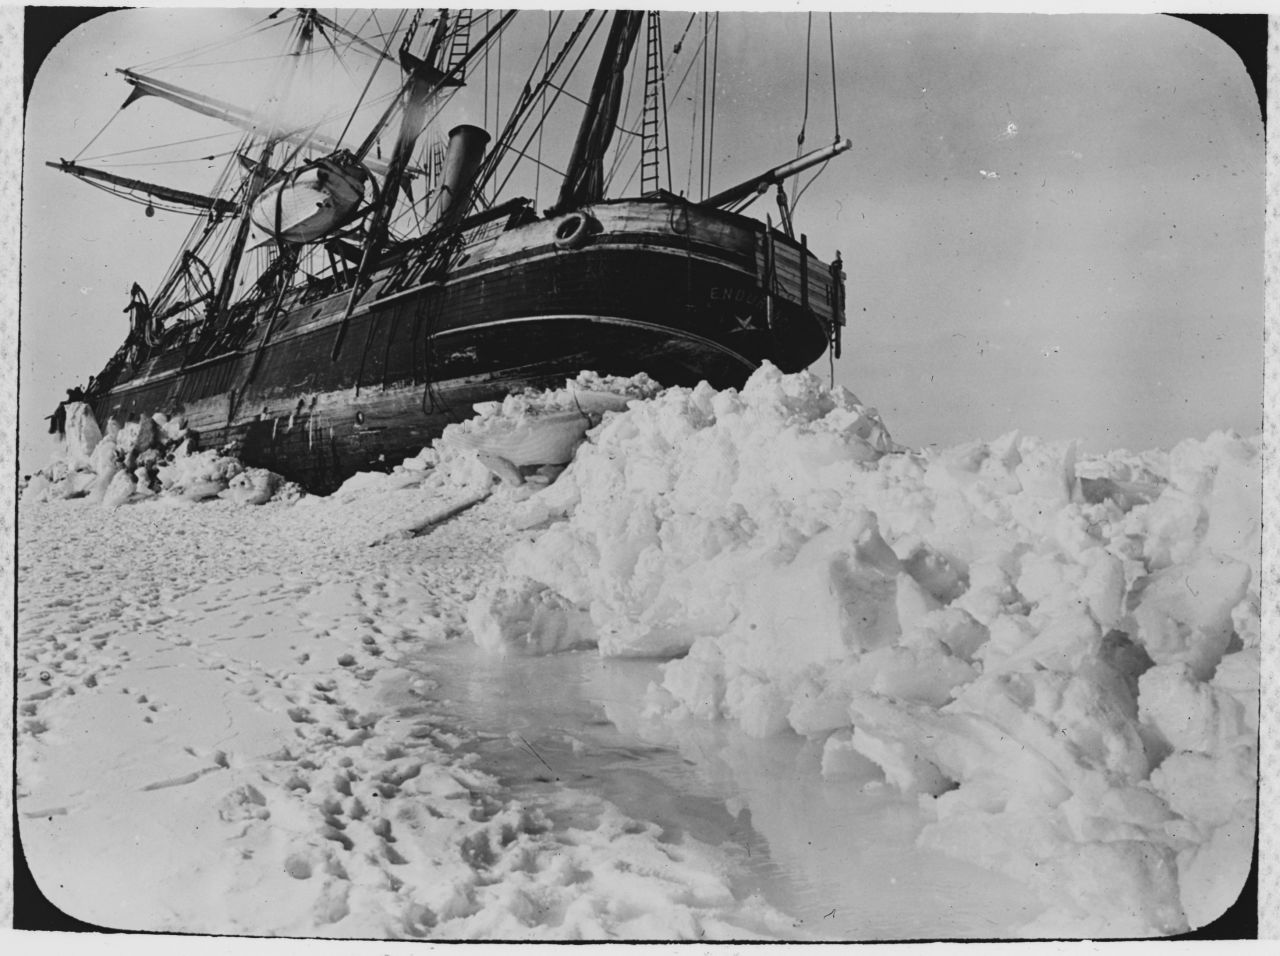 At some point the pressure of the ice pushed the boat over and it began to take on water.